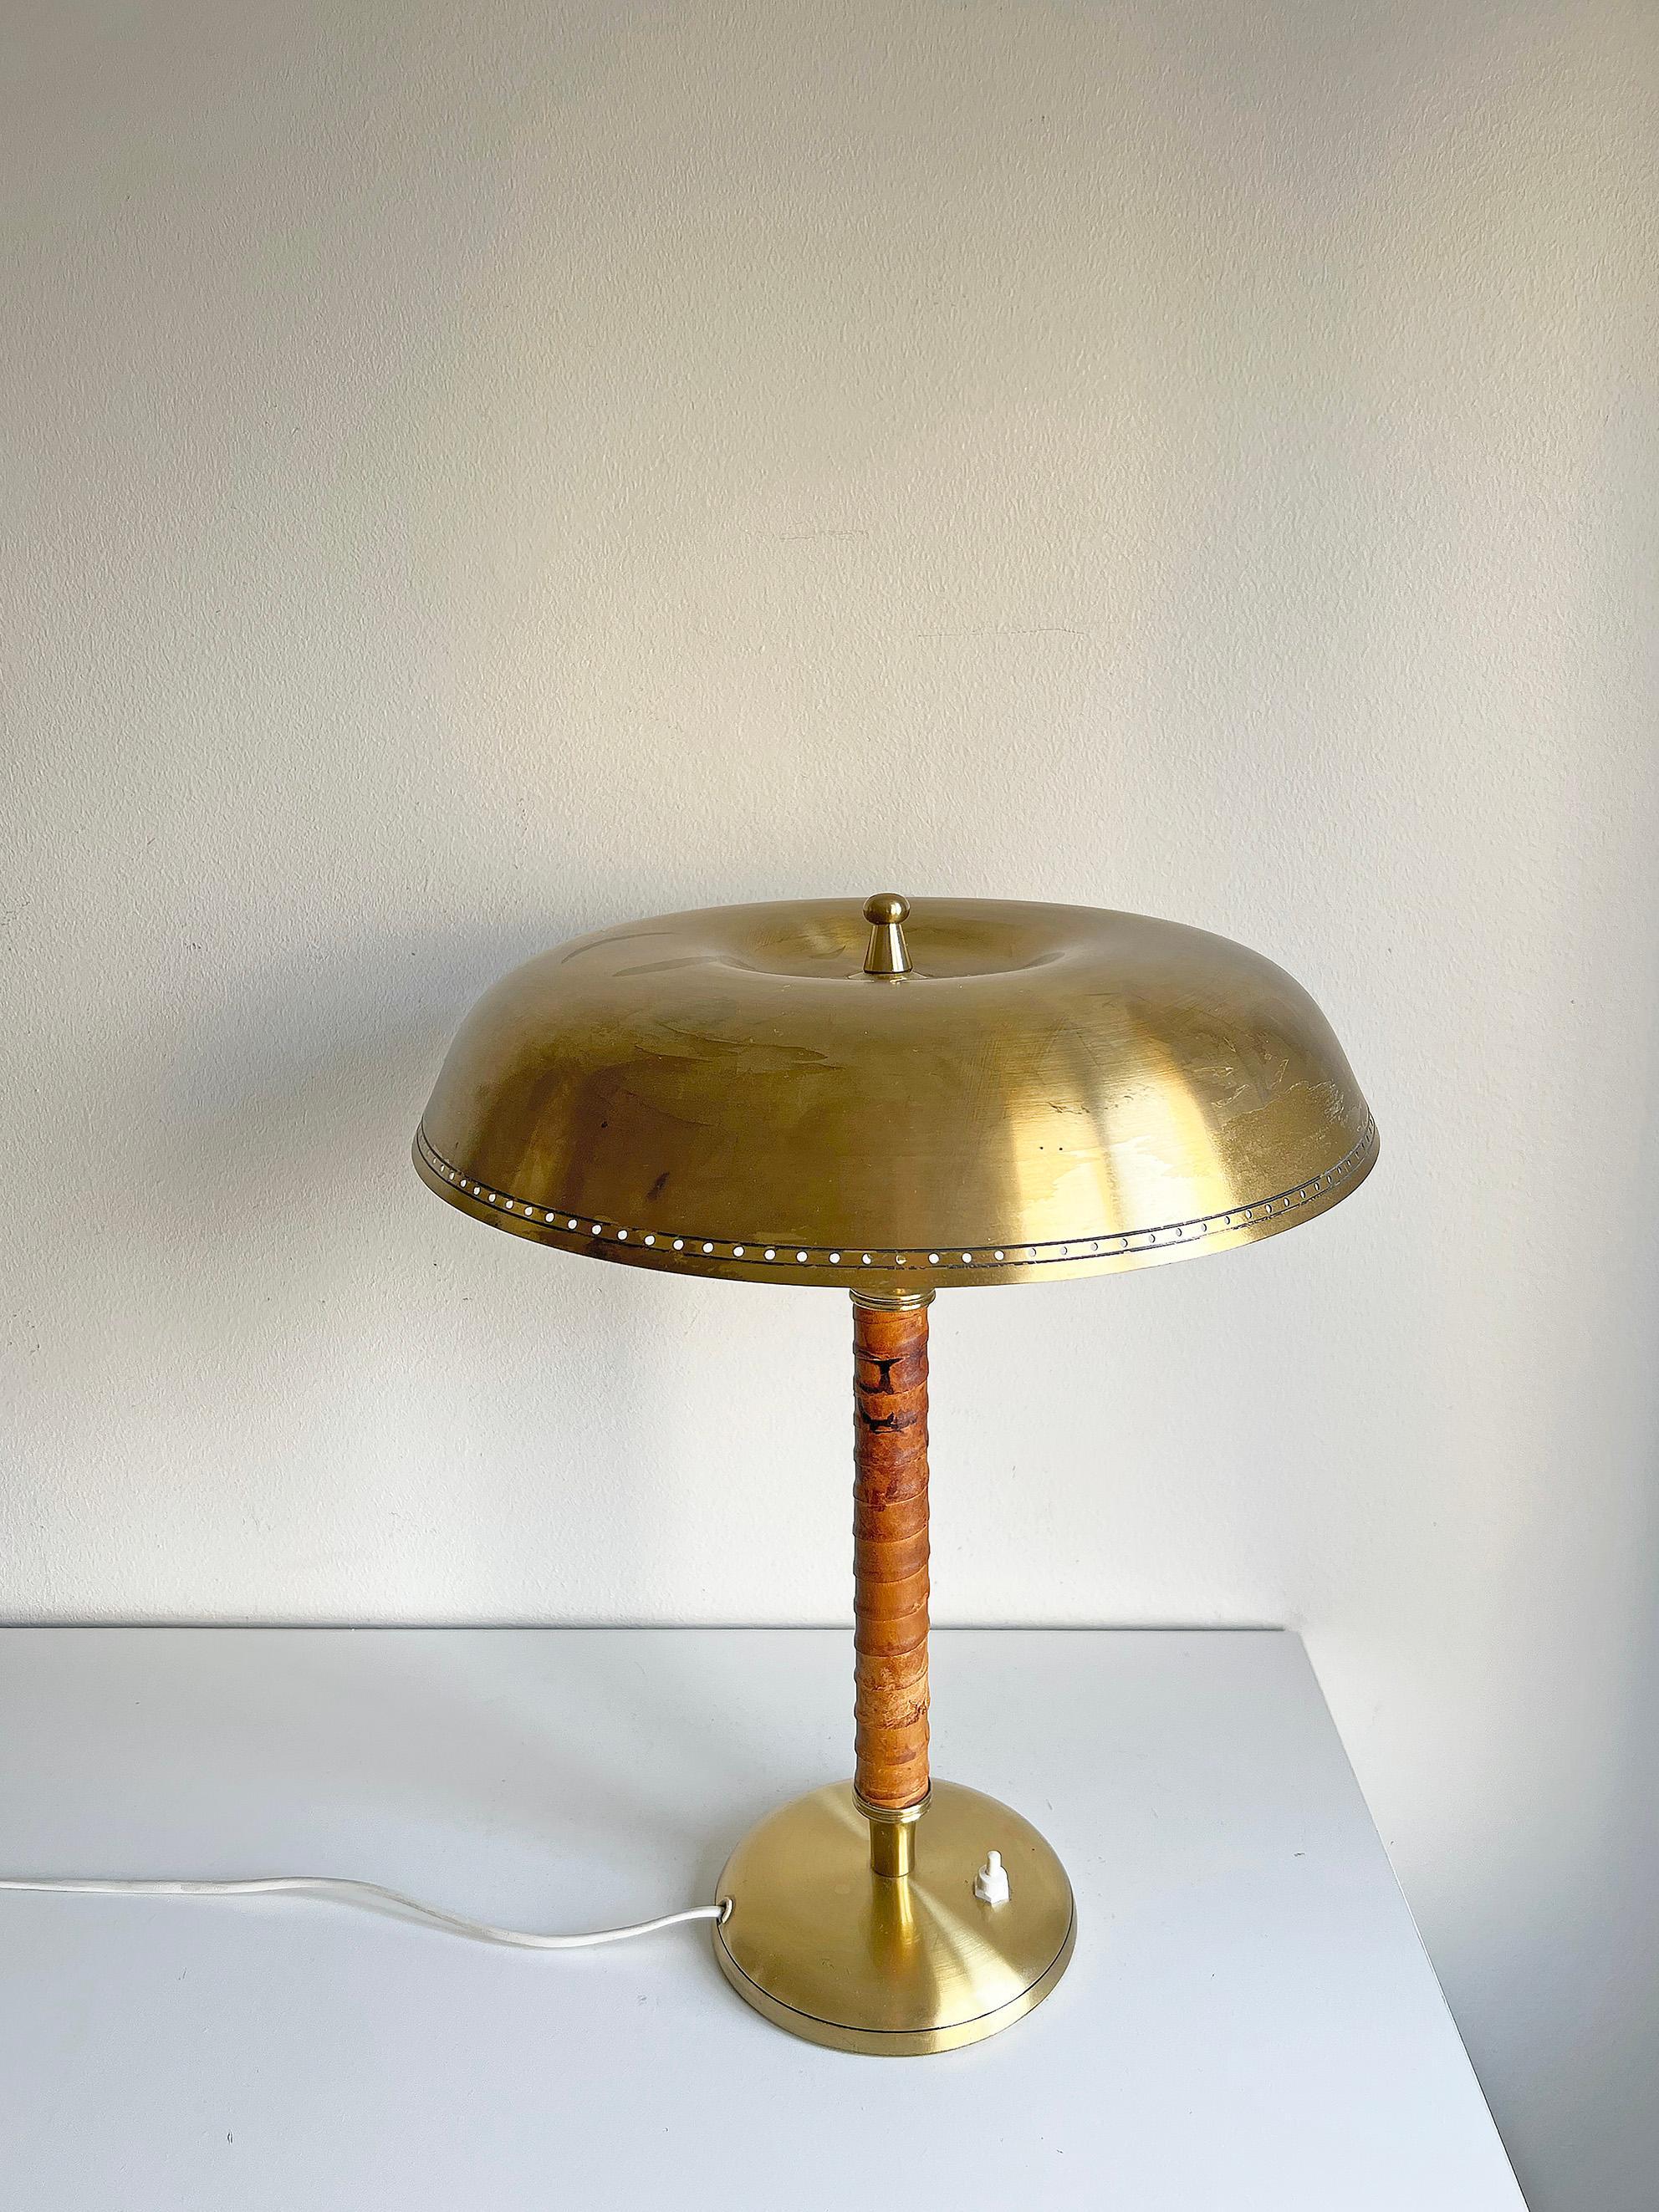 Rare table lamp model 8452 by Boréns, Sweden. 
Signed with makers mark.
Condition: Good vintage condition, wear consistent with age and use, brass and leather patina. 
The shade is slightly slanted.
Rewired. We recommend this lamp to be rewired